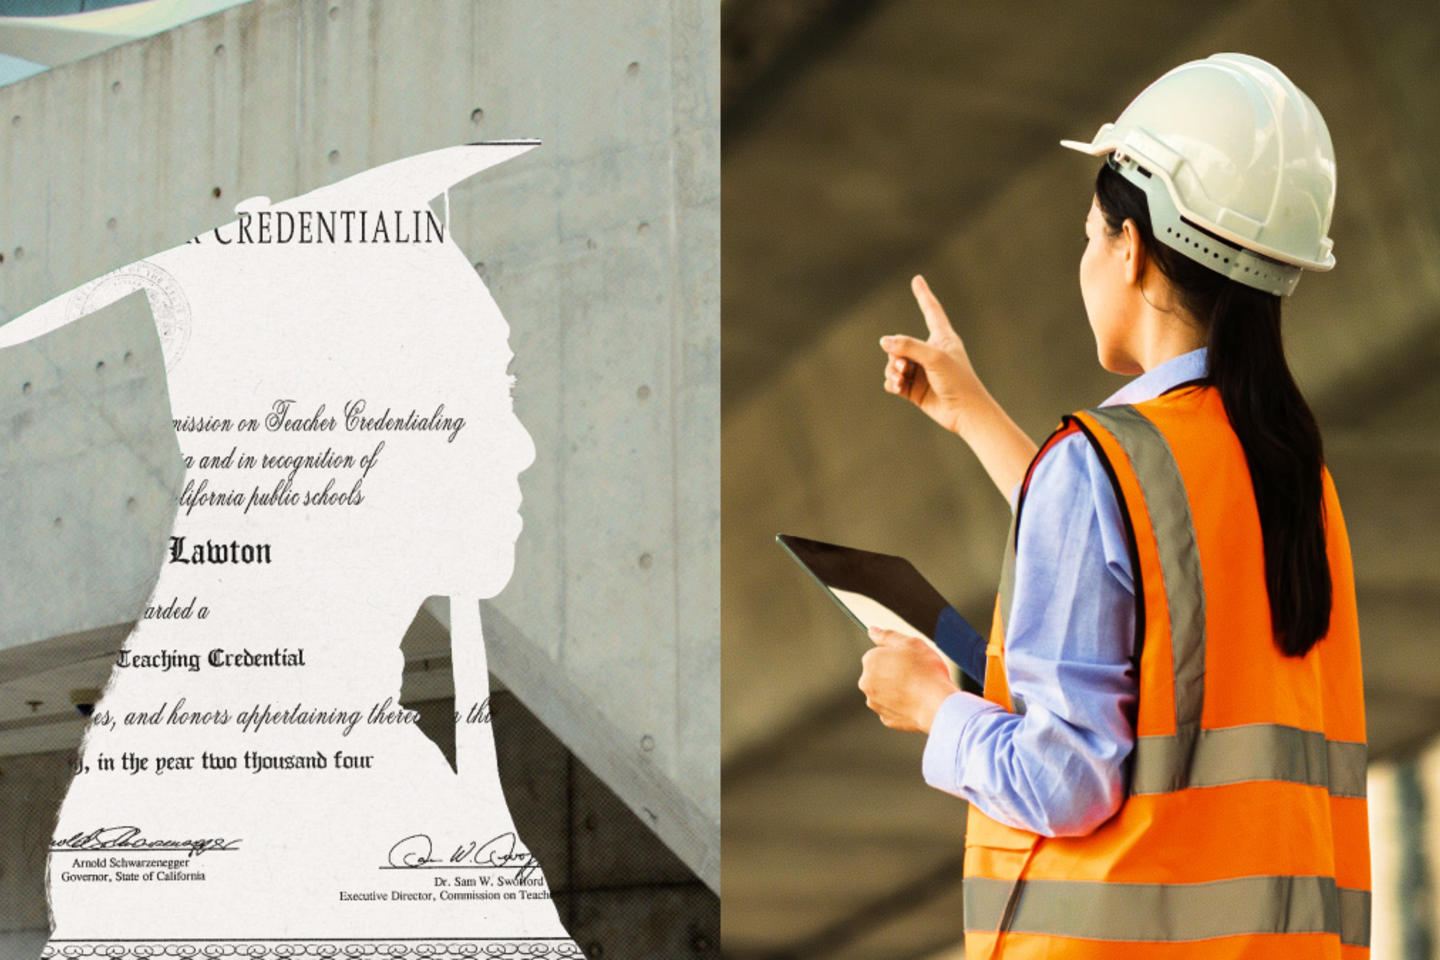 On the left is a credential cut out in the shape of a graduate, while the right shows an image of a woman in a hard hat and safety vest